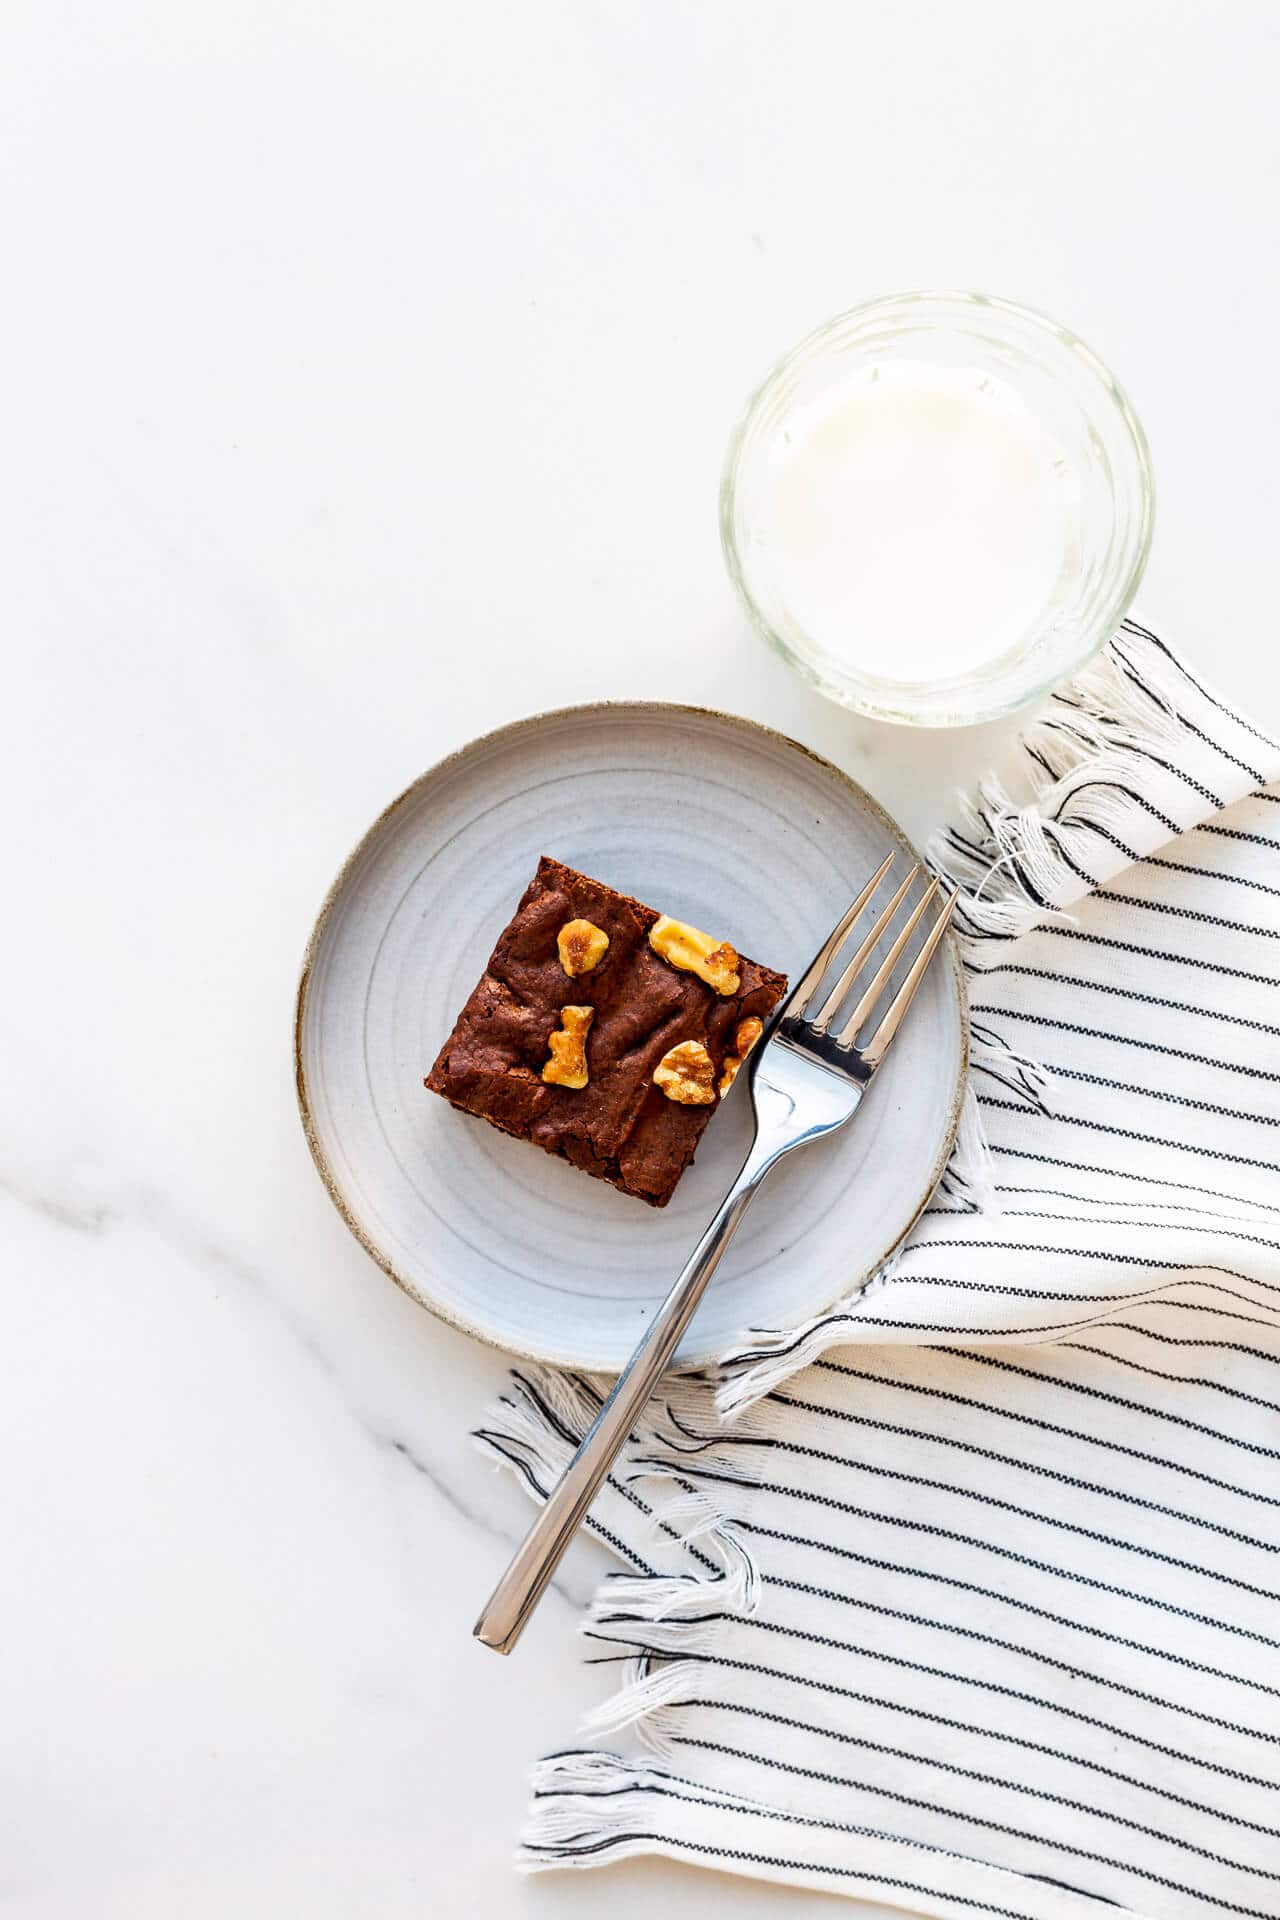 A brownie with walnuts on a ceramic plate with a fork.